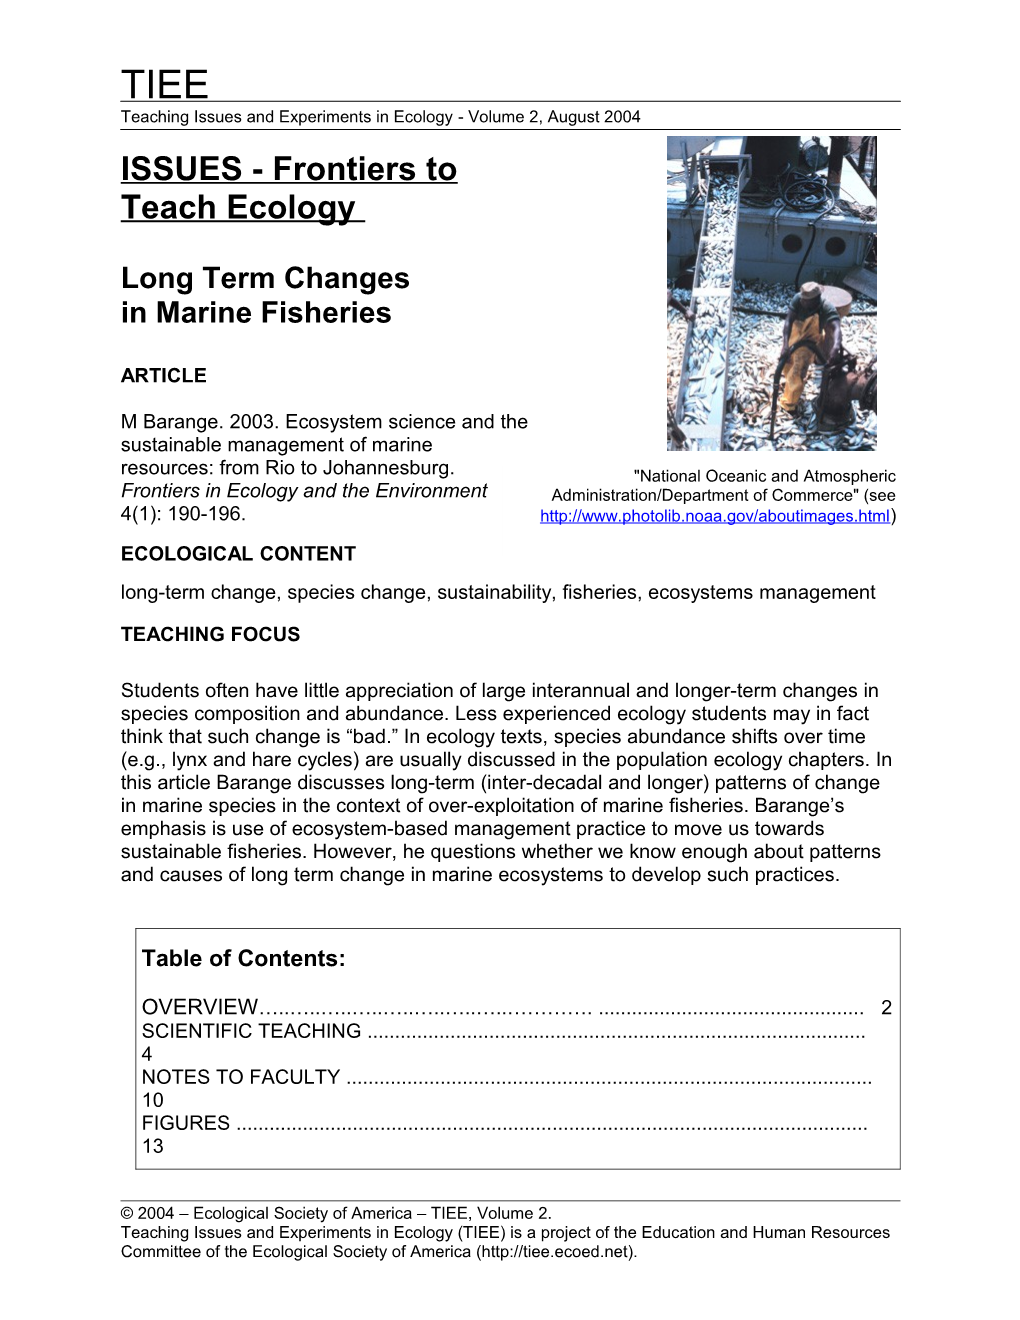 Frontiers Issues to Teach Ecology - Marine Fisheries